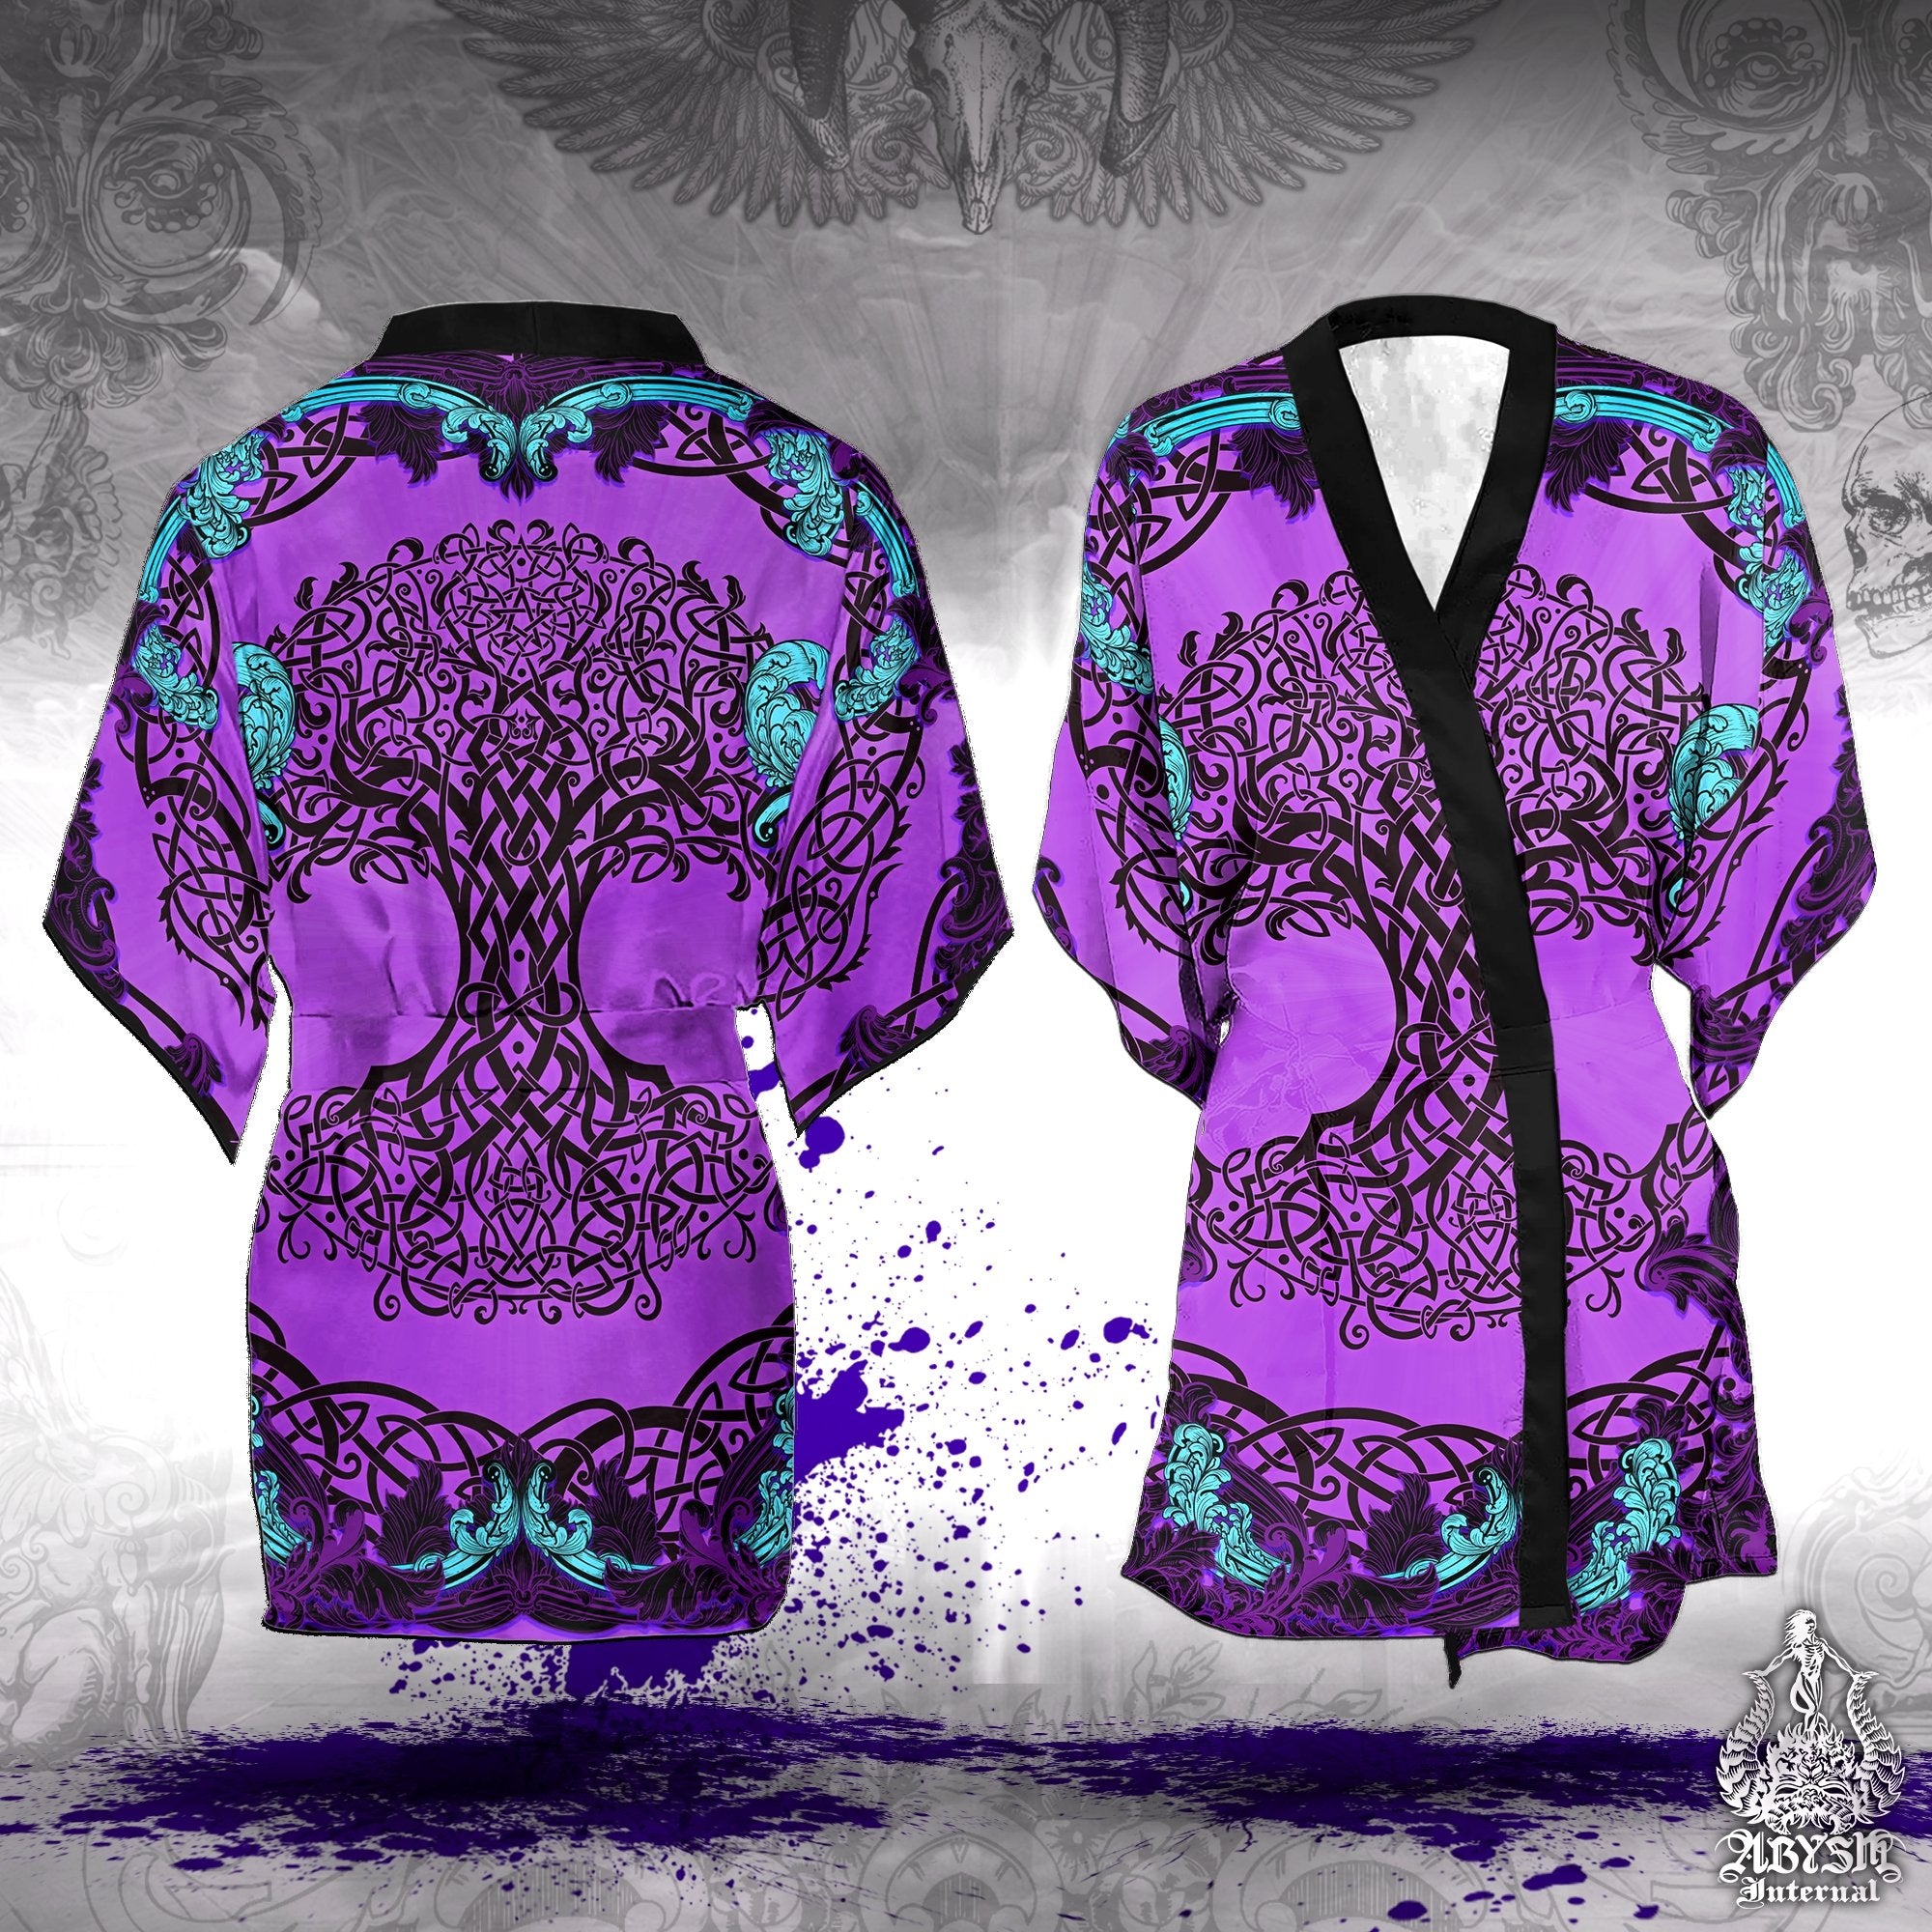 Tree of Life Cover Up, Beach Outfit, Celtic Party Kimono, Wicca Summer Festival Robe, Witchy Indie and Alternative Clothing, Unisex - Pastel Goth - Abysm Internal